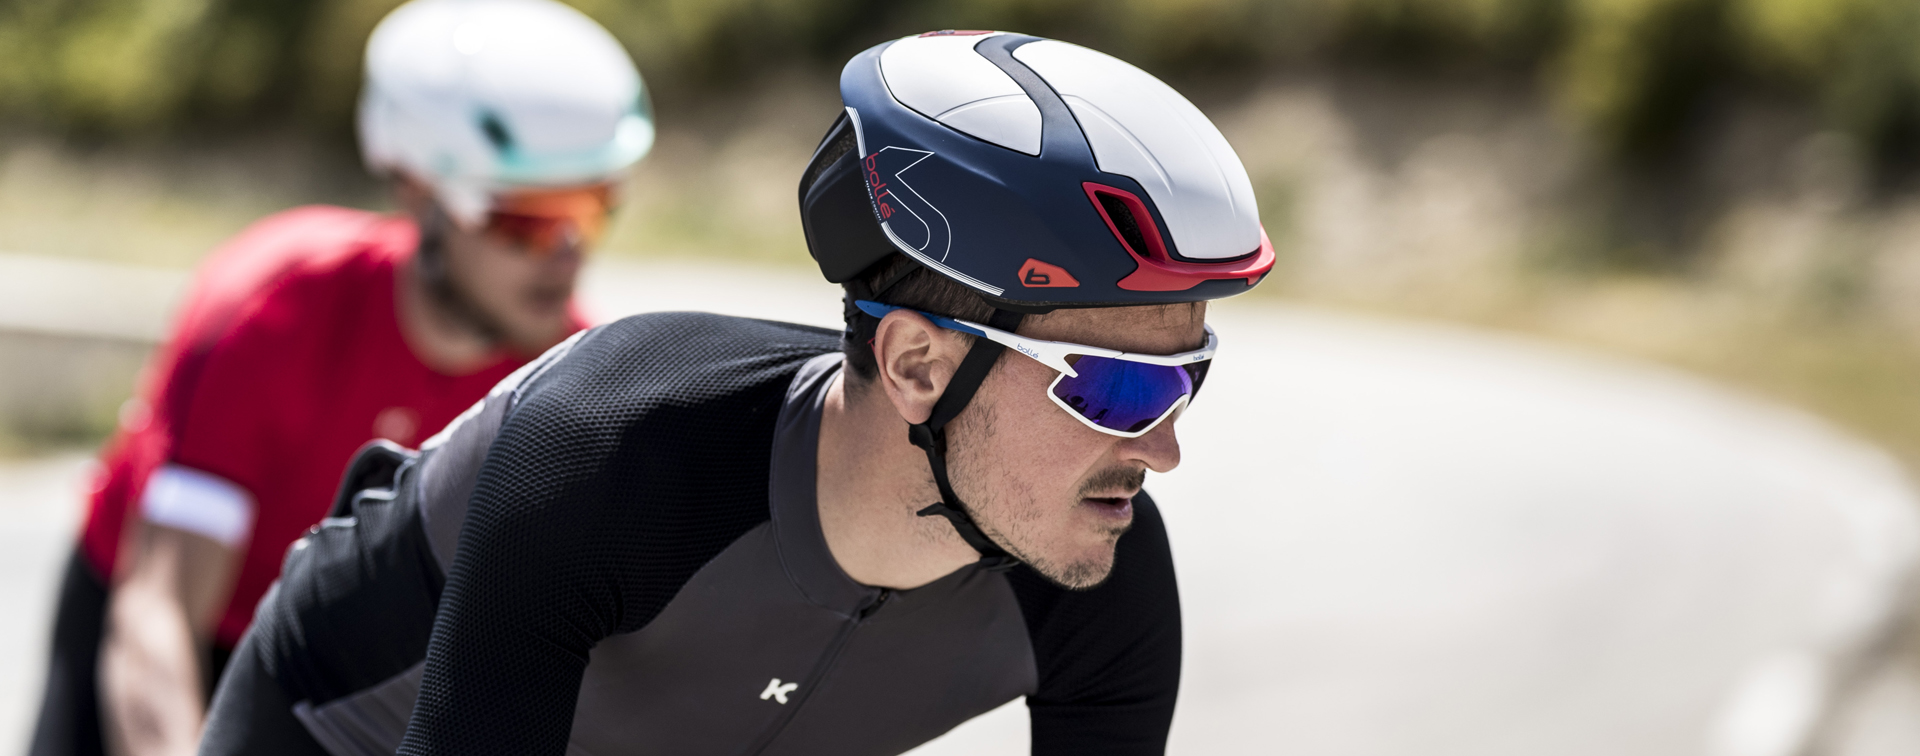 A Guide to the Best Sunglasses - I Love Bicycling